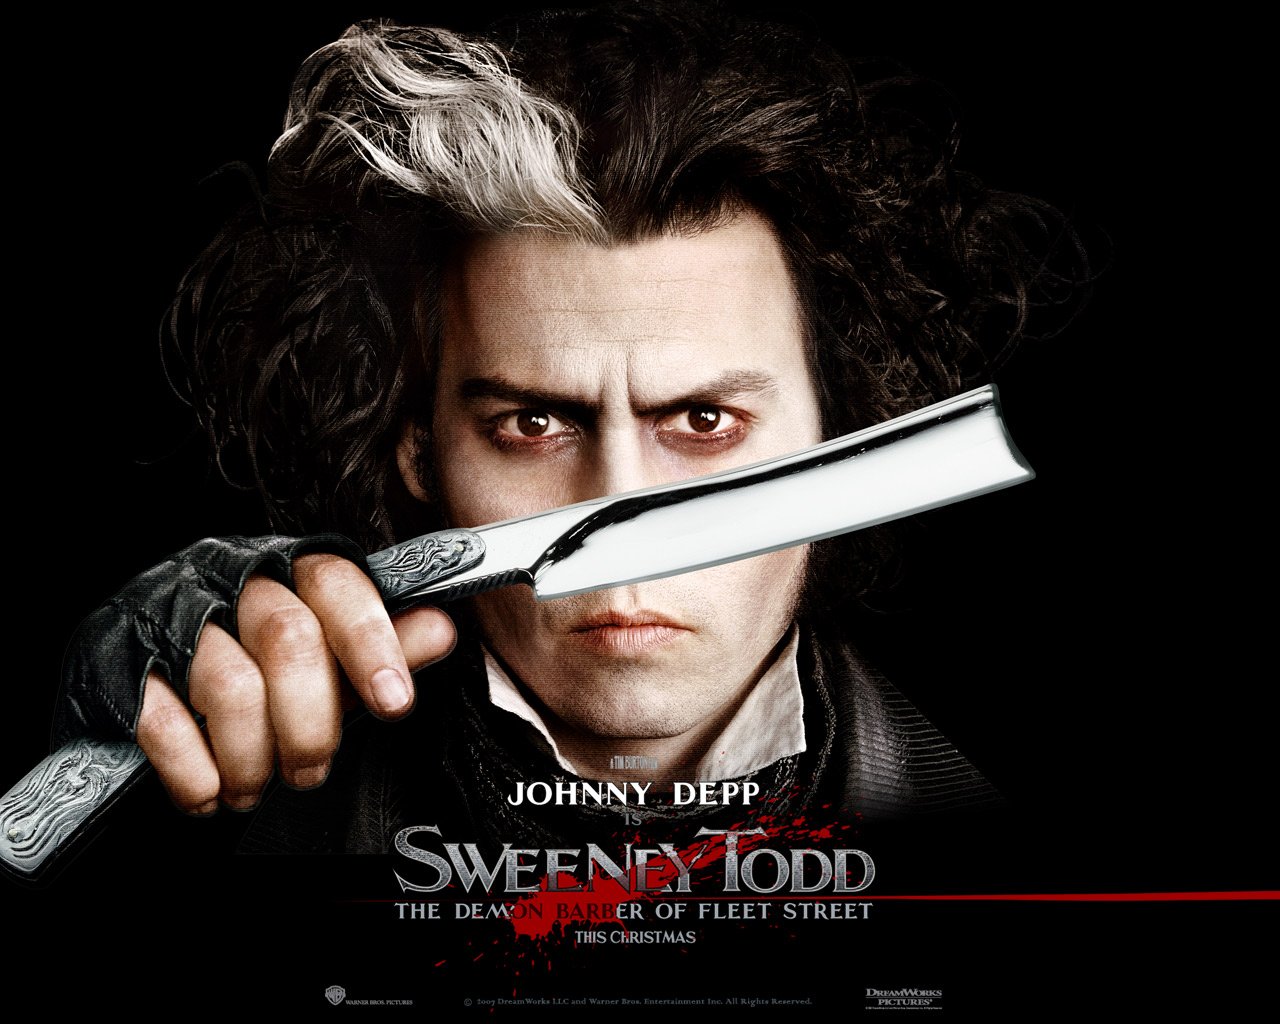 [sweeney_todd_poster_the_knife.jpg]